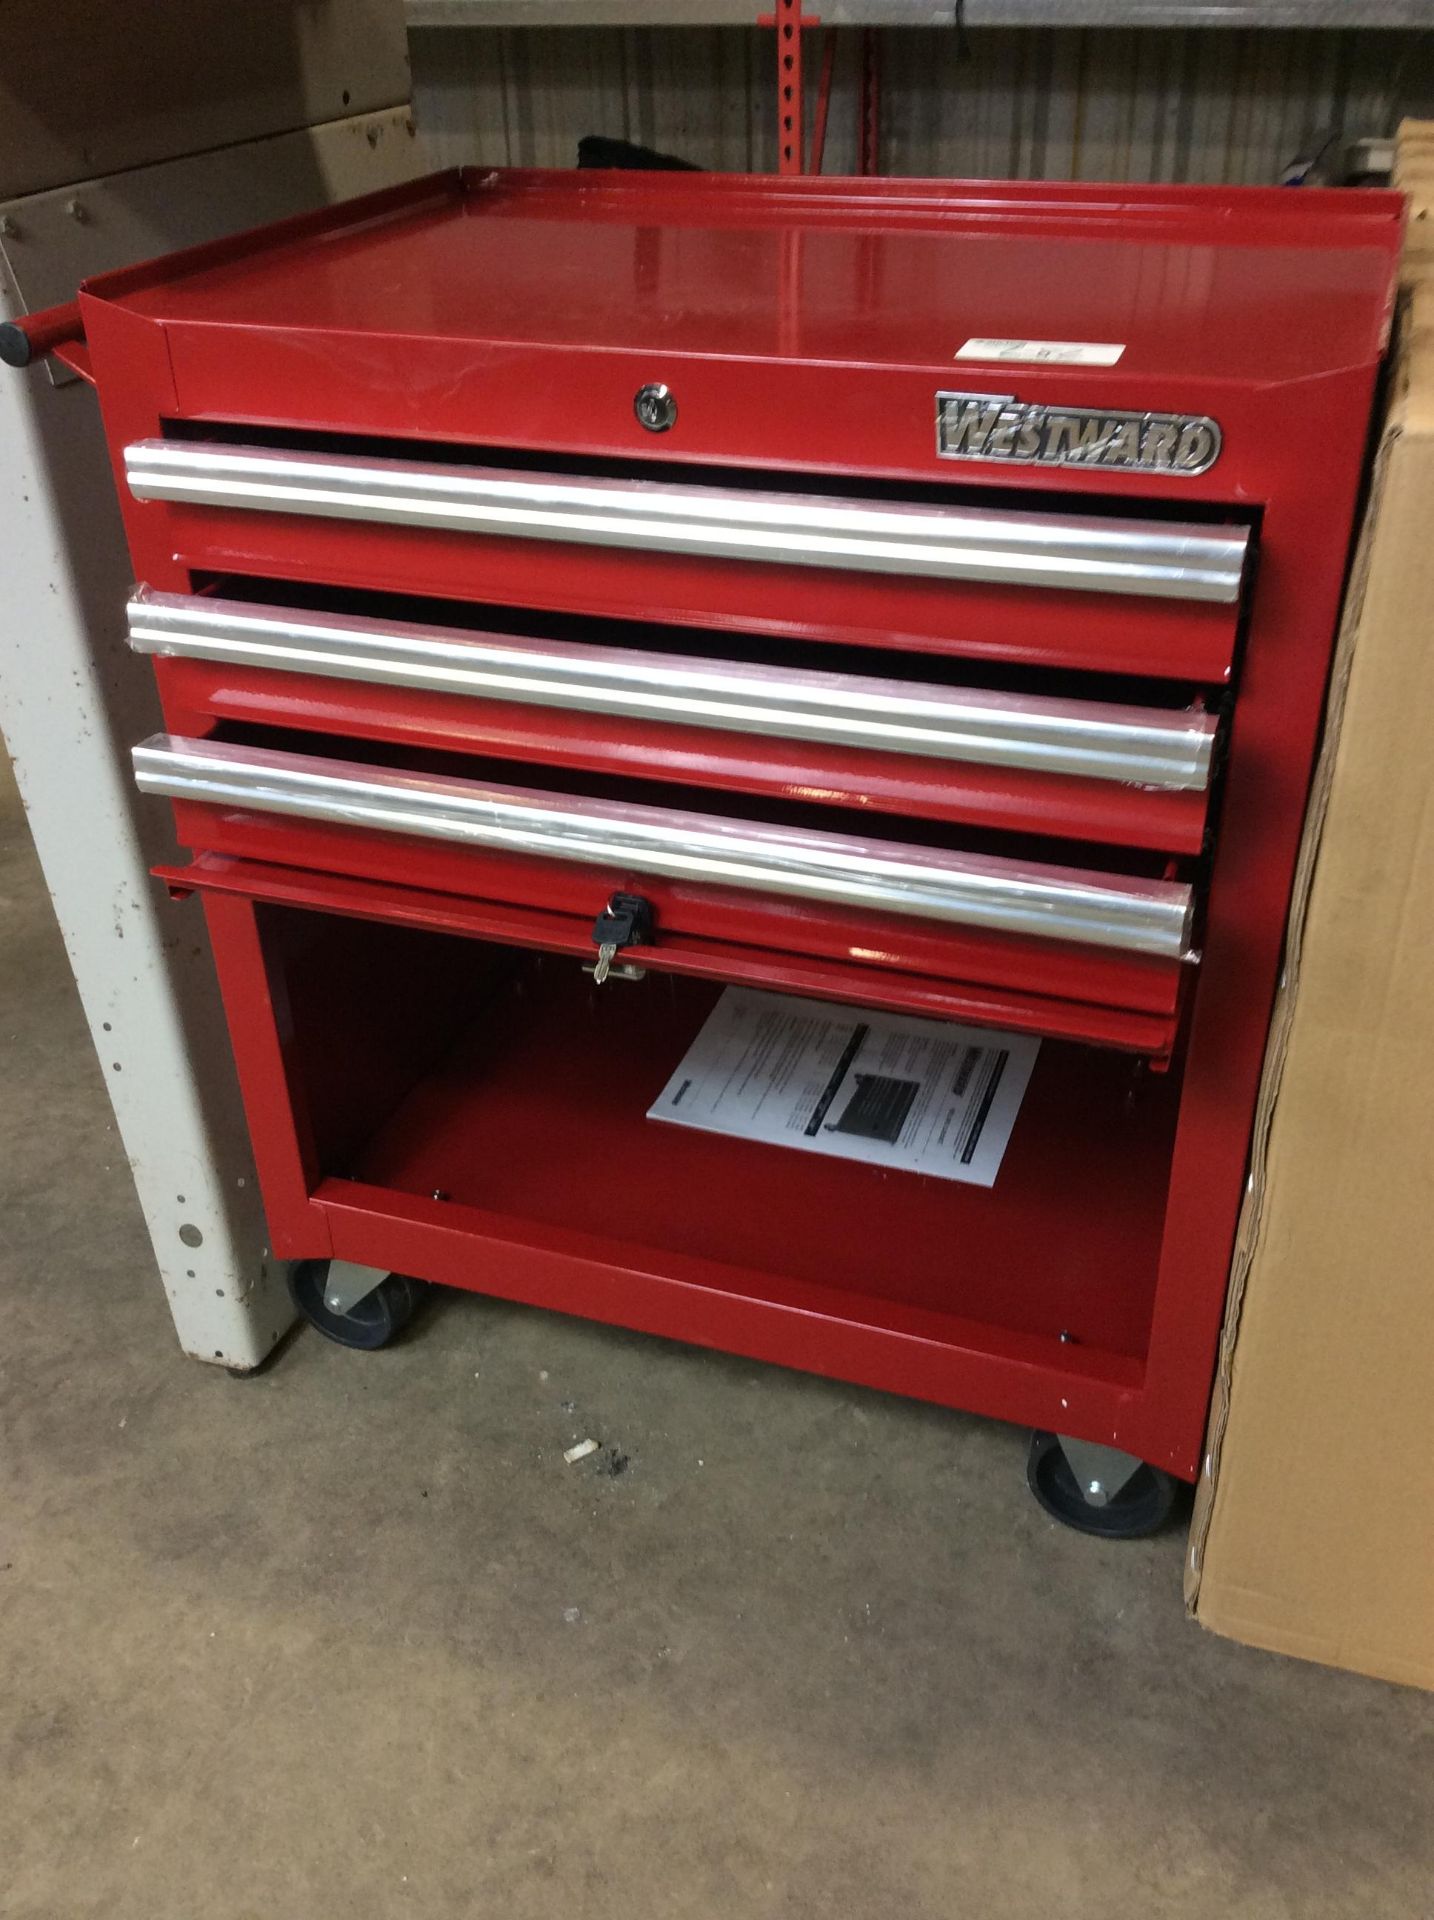 New Westward Mobile Tool Chest - Image 2 of 2